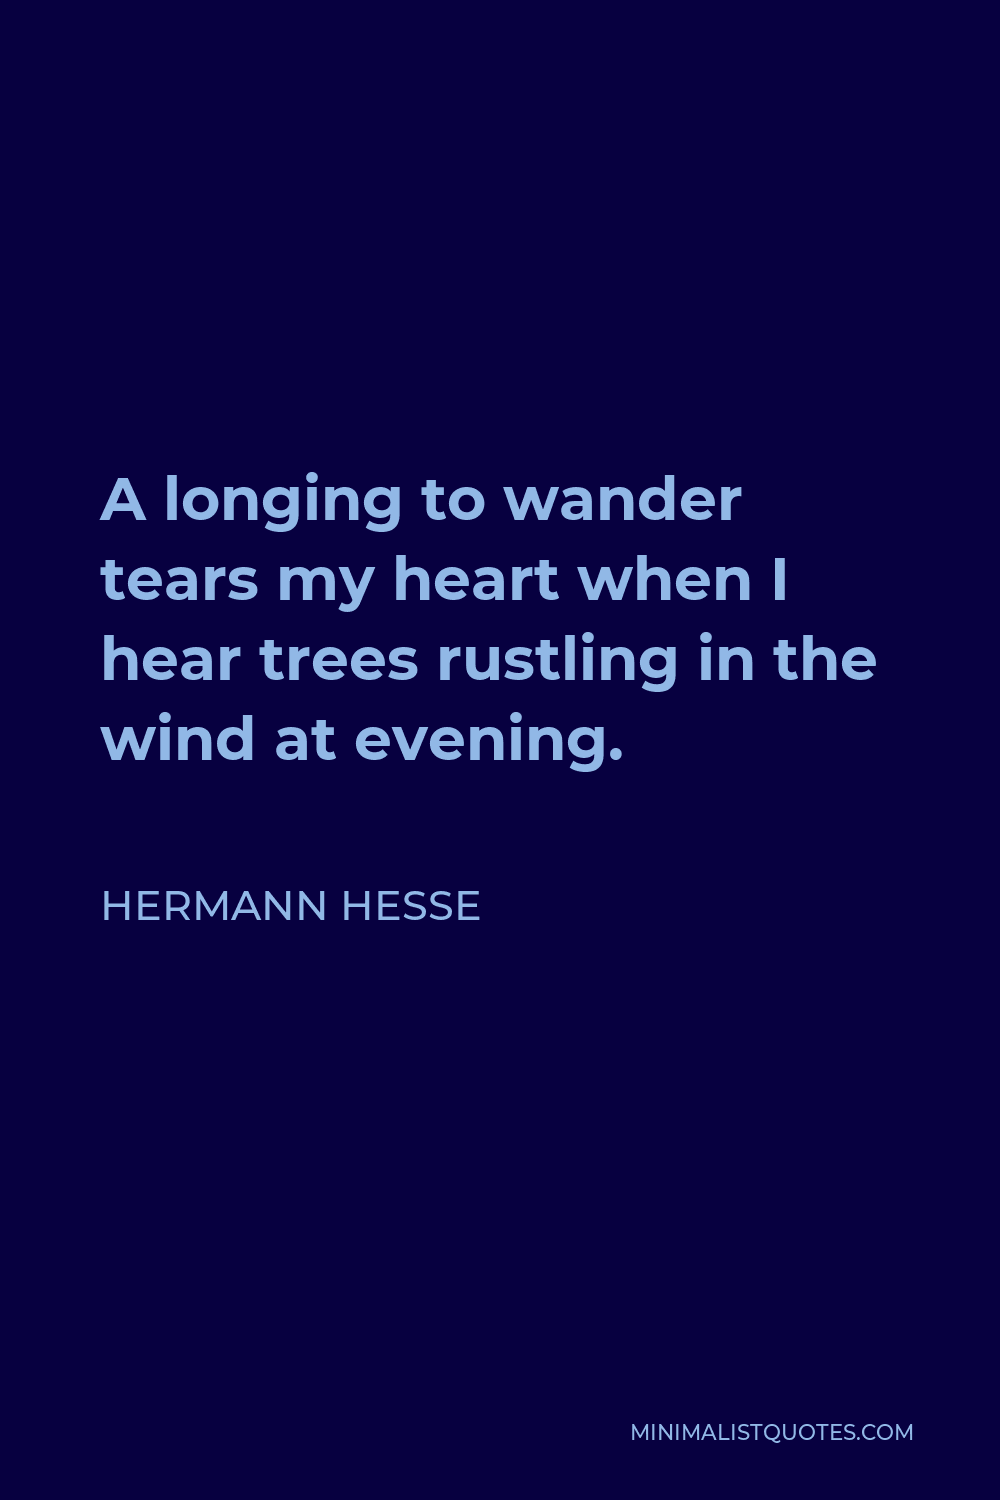 Hermann Hesse Quote - A longing to wander tears my heart when I hear trees rustling in the wind at evening.